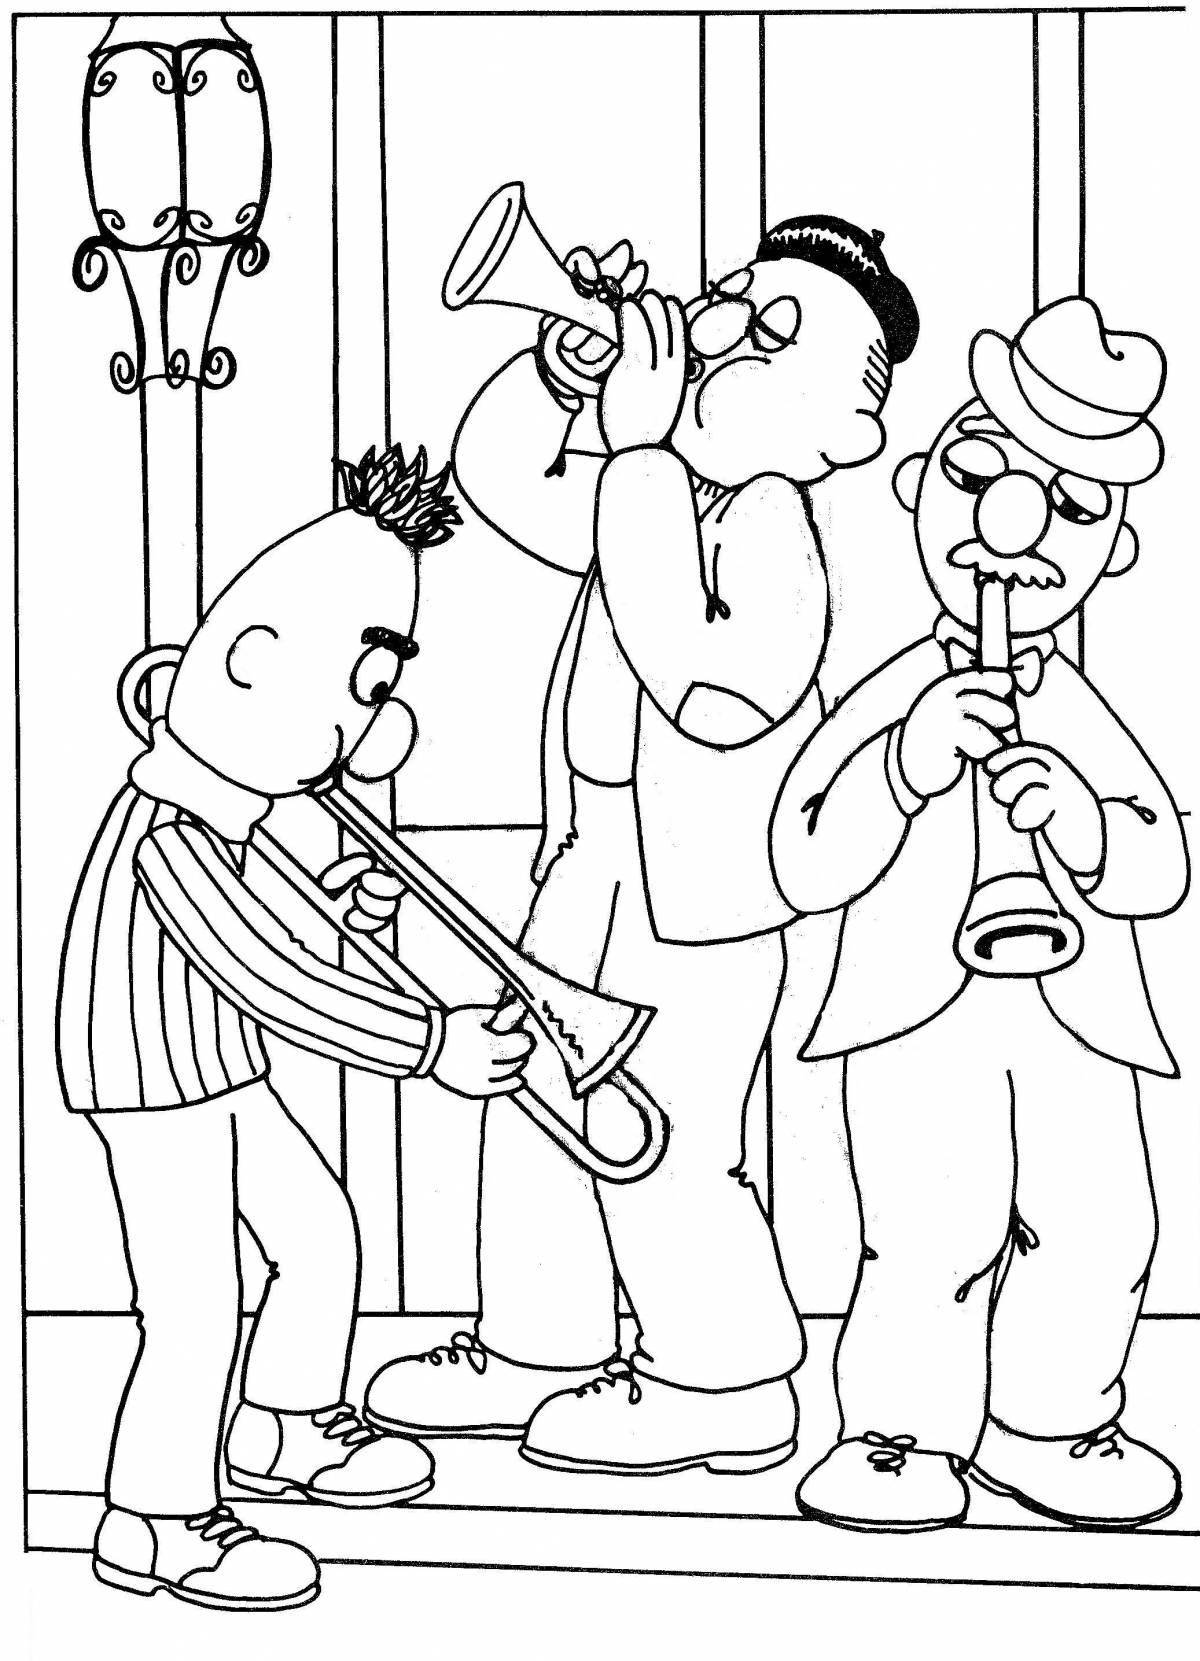 Color-surreal food gang coloring page